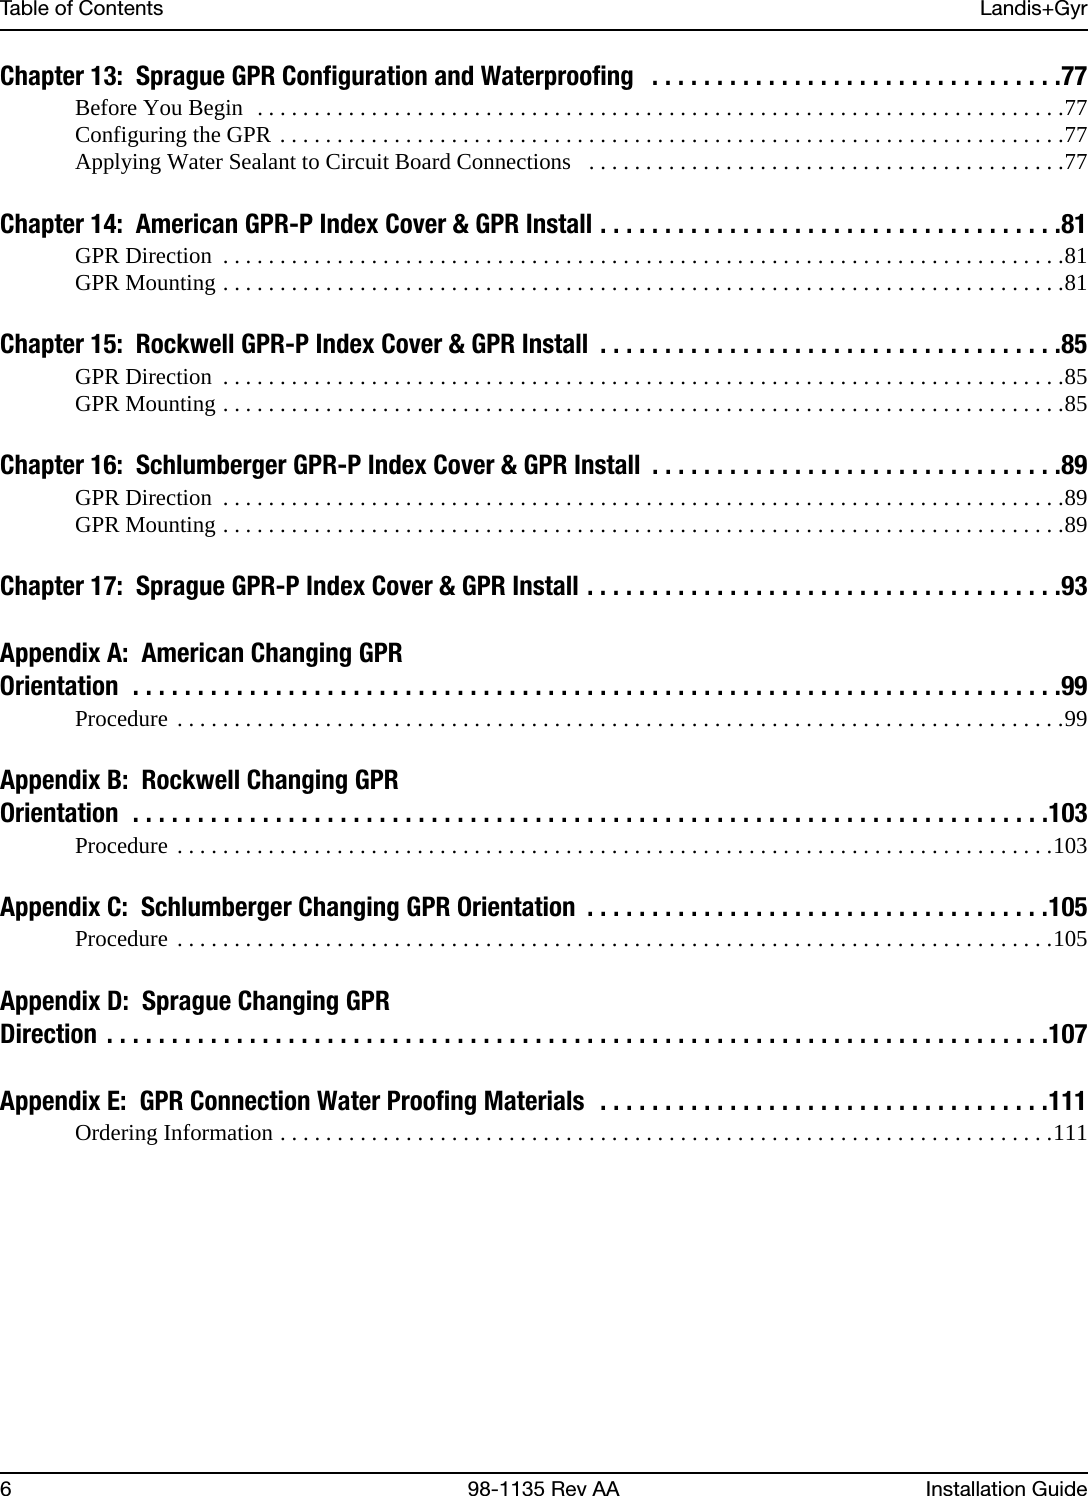 Table of Contents Landis+Gyr6 98-1135 Rev AA Installation GuideChapter 13:  Sprague GPR Configuration and Waterproofing   . . . . . . . . . . . . . . . . . . . . . . . . . . . . . . . .77Before You Begin  . . . . . . . . . . . . . . . . . . . . . . . . . . . . . . . . . . . . . . . . . . . . . . . . . . . . . . . . . . . . . . . . . . . . . . .77Configuring the GPR . . . . . . . . . . . . . . . . . . . . . . . . . . . . . . . . . . . . . . . . . . . . . . . . . . . . . . . . . . . . . . . . . . . . .77Applying Water Sealant to Circuit Board Connections   . . . . . . . . . . . . . . . . . . . . . . . . . . . . . . . . . . . . . . . . . .77Chapter 14:  American GPR-P Index Cover &amp; GPR Install . . . . . . . . . . . . . . . . . . . . . . . . . . . . . . . . . . . .81GPR Direction  . . . . . . . . . . . . . . . . . . . . . . . . . . . . . . . . . . . . . . . . . . . . . . . . . . . . . . . . . . . . . . . . . . . . . . . . . .81GPR Mounting . . . . . . . . . . . . . . . . . . . . . . . . . . . . . . . . . . . . . . . . . . . . . . . . . . . . . . . . . . . . . . . . . . . . . . . . . .81Chapter 15:  Rockwell GPR-P Index Cover &amp; GPR Install  . . . . . . . . . . . . . . . . . . . . . . . . . . . . . . . . . . . .85GPR Direction  . . . . . . . . . . . . . . . . . . . . . . . . . . . . . . . . . . . . . . . . . . . . . . . . . . . . . . . . . . . . . . . . . . . . . . . . . .85GPR Mounting . . . . . . . . . . . . . . . . . . . . . . . . . . . . . . . . . . . . . . . . . . . . . . . . . . . . . . . . . . . . . . . . . . . . . . . . . .85Chapter 16:  Schlumberger GPR-P Index Cover &amp; GPR Install  . . . . . . . . . . . . . . . . . . . . . . . . . . . . . . . .89GPR Direction  . . . . . . . . . . . . . . . . . . . . . . . . . . . . . . . . . . . . . . . . . . . . . . . . . . . . . . . . . . . . . . . . . . . . . . . . . .89GPR Mounting . . . . . . . . . . . . . . . . . . . . . . . . . . . . . . . . . . . . . . . . . . . . . . . . . . . . . . . . . . . . . . . . . . . . . . . . . .89Chapter 17:  Sprague GPR-P Index Cover &amp; GPR Install . . . . . . . . . . . . . . . . . . . . . . . . . . . . . . . . . . . . .93Appendix A:  American Changing GPROrientation  . . . . . . . . . . . . . . . . . . . . . . . . . . . . . . . . . . . . . . . . . . . . . . . . . . . . . . . . . . . . . . . . . . . . . . . .99Procedure . . . . . . . . . . . . . . . . . . . . . . . . . . . . . . . . . . . . . . . . . . . . . . . . . . . . . . . . . . . . . . . . . . . . . . . . . . . . . .99Appendix B:  Rockwell Changing GPROrientation  . . . . . . . . . . . . . . . . . . . . . . . . . . . . . . . . . . . . . . . . . . . . . . . . . . . . . . . . . . . . . . . . . . . . . . .103Procedure . . . . . . . . . . . . . . . . . . . . . . . . . . . . . . . . . . . . . . . . . . . . . . . . . . . . . . . . . . . . . . . . . . . . . . . . . . . . .103Appendix C:  Schlumberger Changing GPR Orientation  . . . . . . . . . . . . . . . . . . . . . . . . . . . . . . . . . . . .105Procedure . . . . . . . . . . . . . . . . . . . . . . . . . . . . . . . . . . . . . . . . . . . . . . . . . . . . . . . . . . . . . . . . . . . . . . . . . . . . .105Appendix D:  Sprague Changing GPRDirection  . . . . . . . . . . . . . . . . . . . . . . . . . . . . . . . . . . . . . . . . . . . . . . . . . . . . . . . . . . . . . . . . . . . . . . . . .107Appendix E:  GPR Connection Water Proofing Materials  . . . . . . . . . . . . . . . . . . . . . . . . . . . . . . . . . . .111Ordering Information . . . . . . . . . . . . . . . . . . . . . . . . . . . . . . . . . . . . . . . . . . . . . . . . . . . . . . . . . . . . . . . . . . . .111